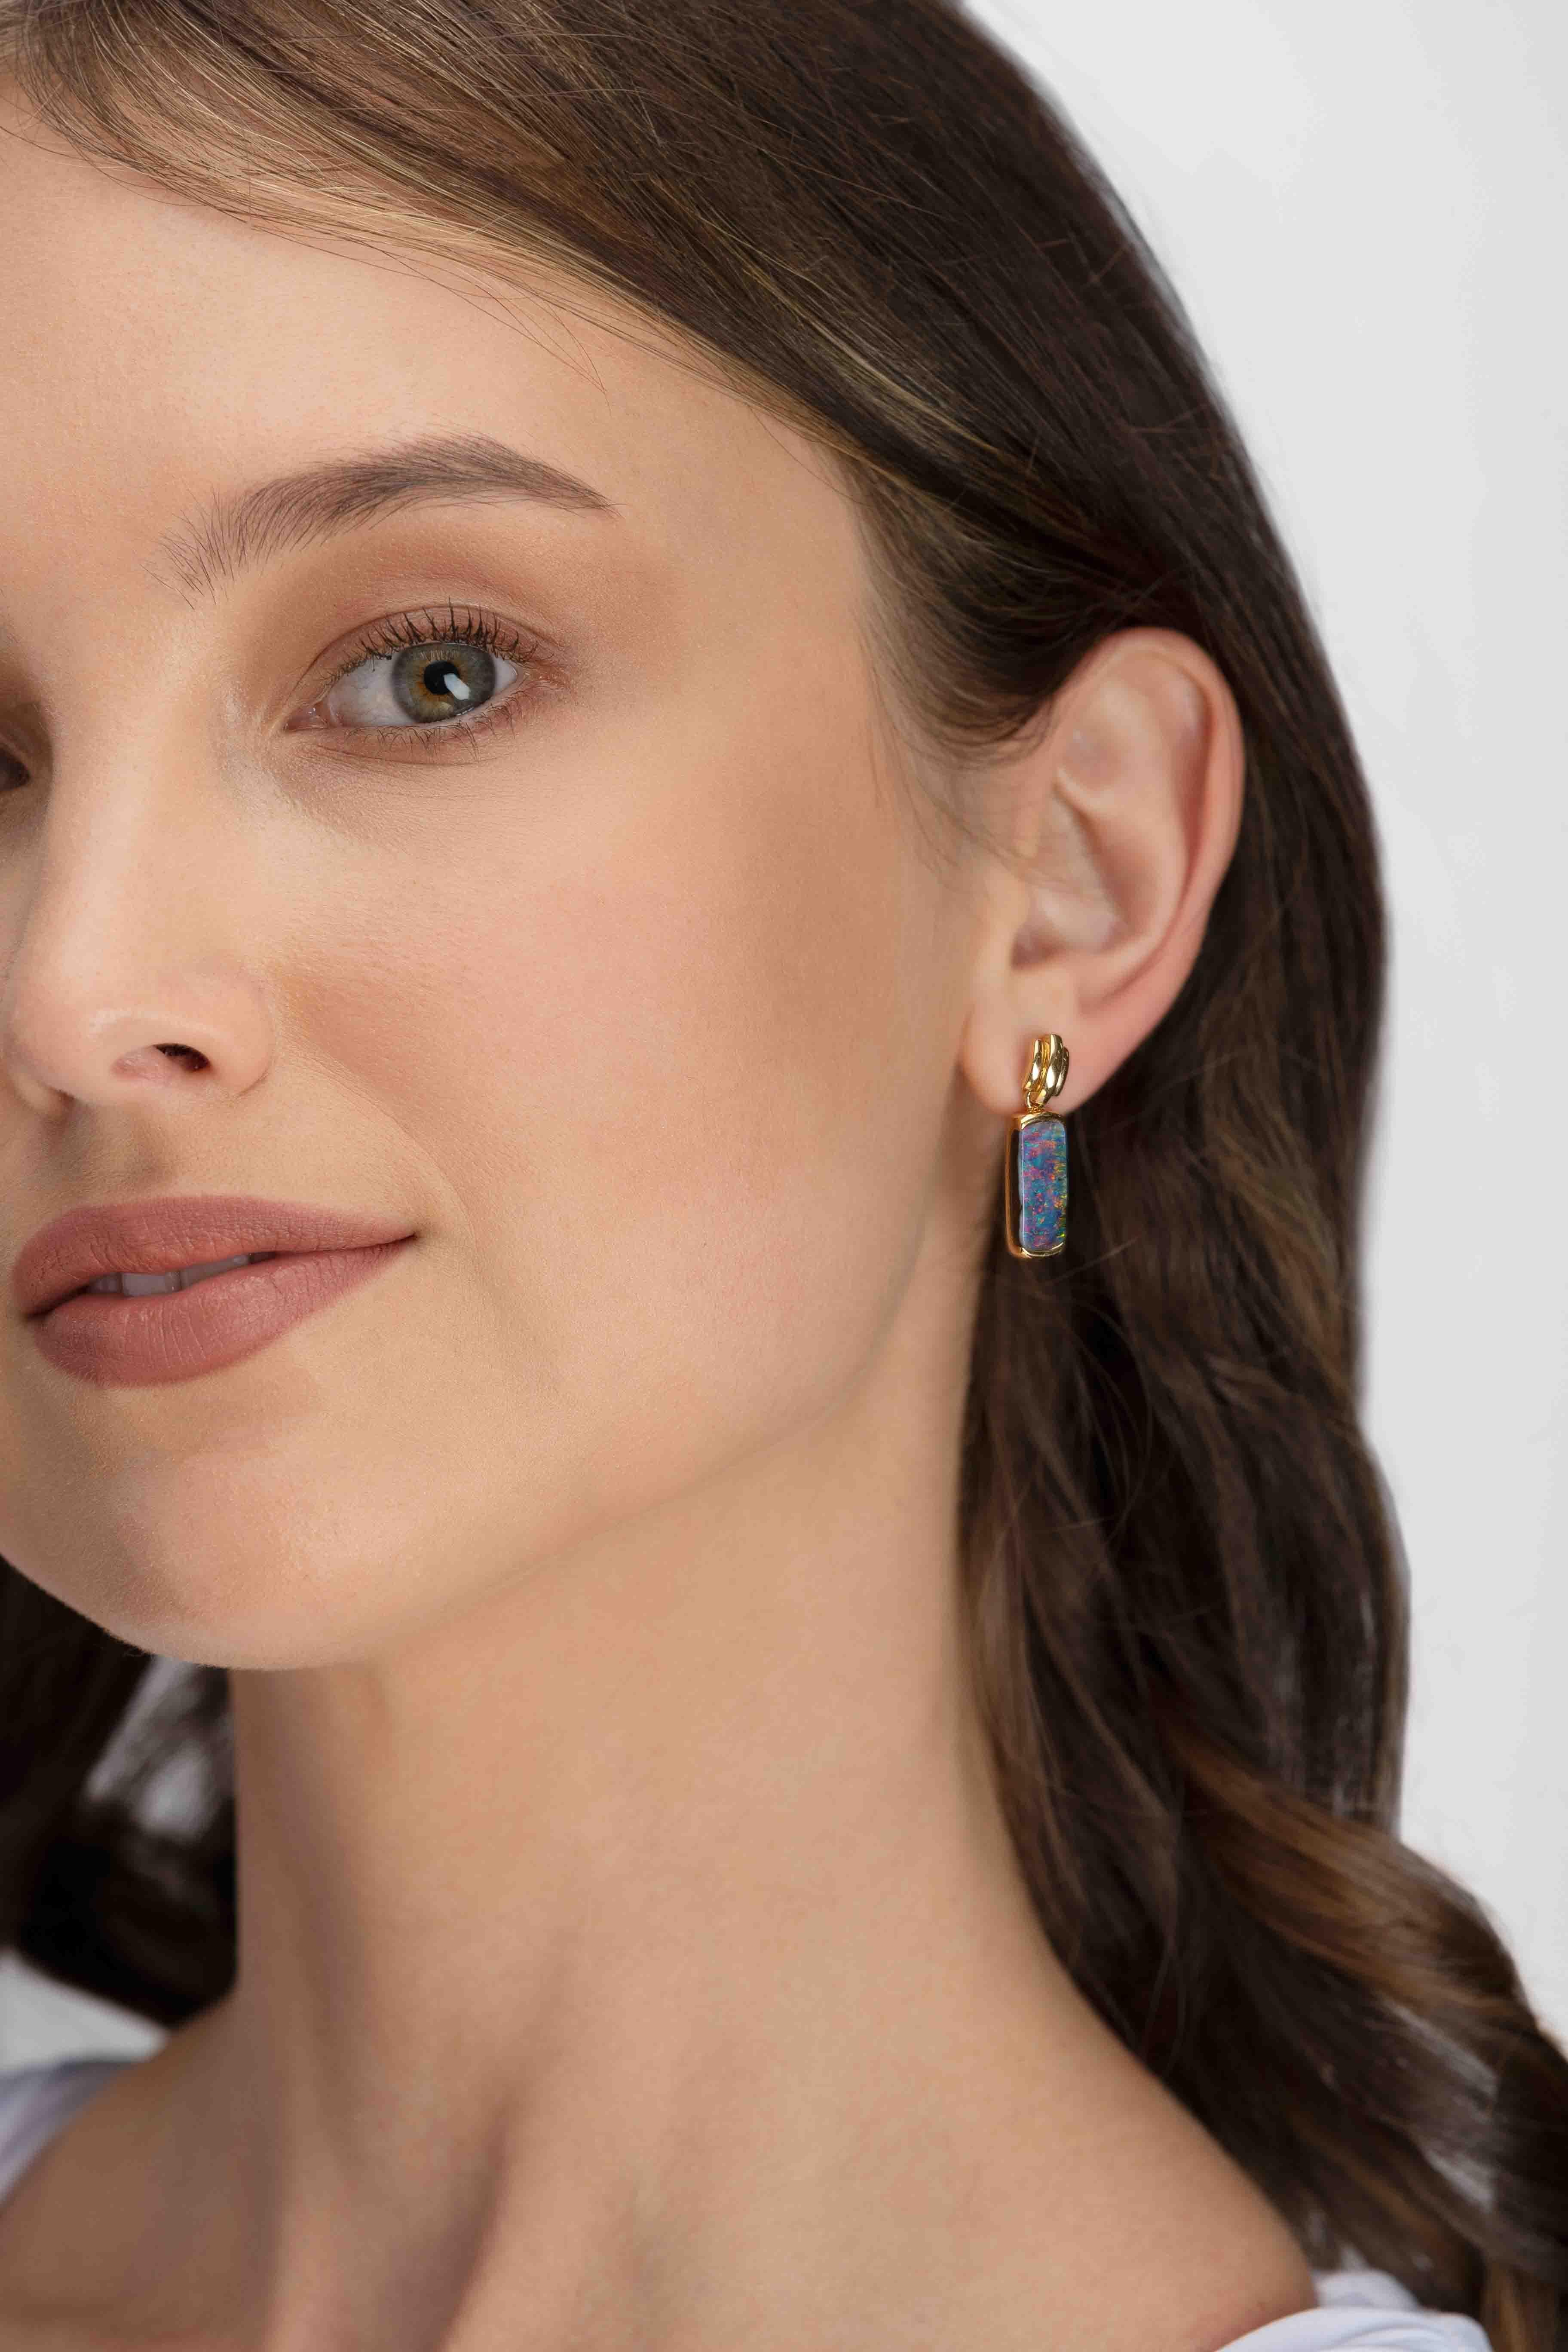 “Waltz of the Flowers” opal earrings present gorgeously colourful Winton boulder opals (8.72ct) that swing, sway, and dance the night away with every movement. An arresting 18K yellow gold setting enhances the mesmerising play-of-colour. Inspired by